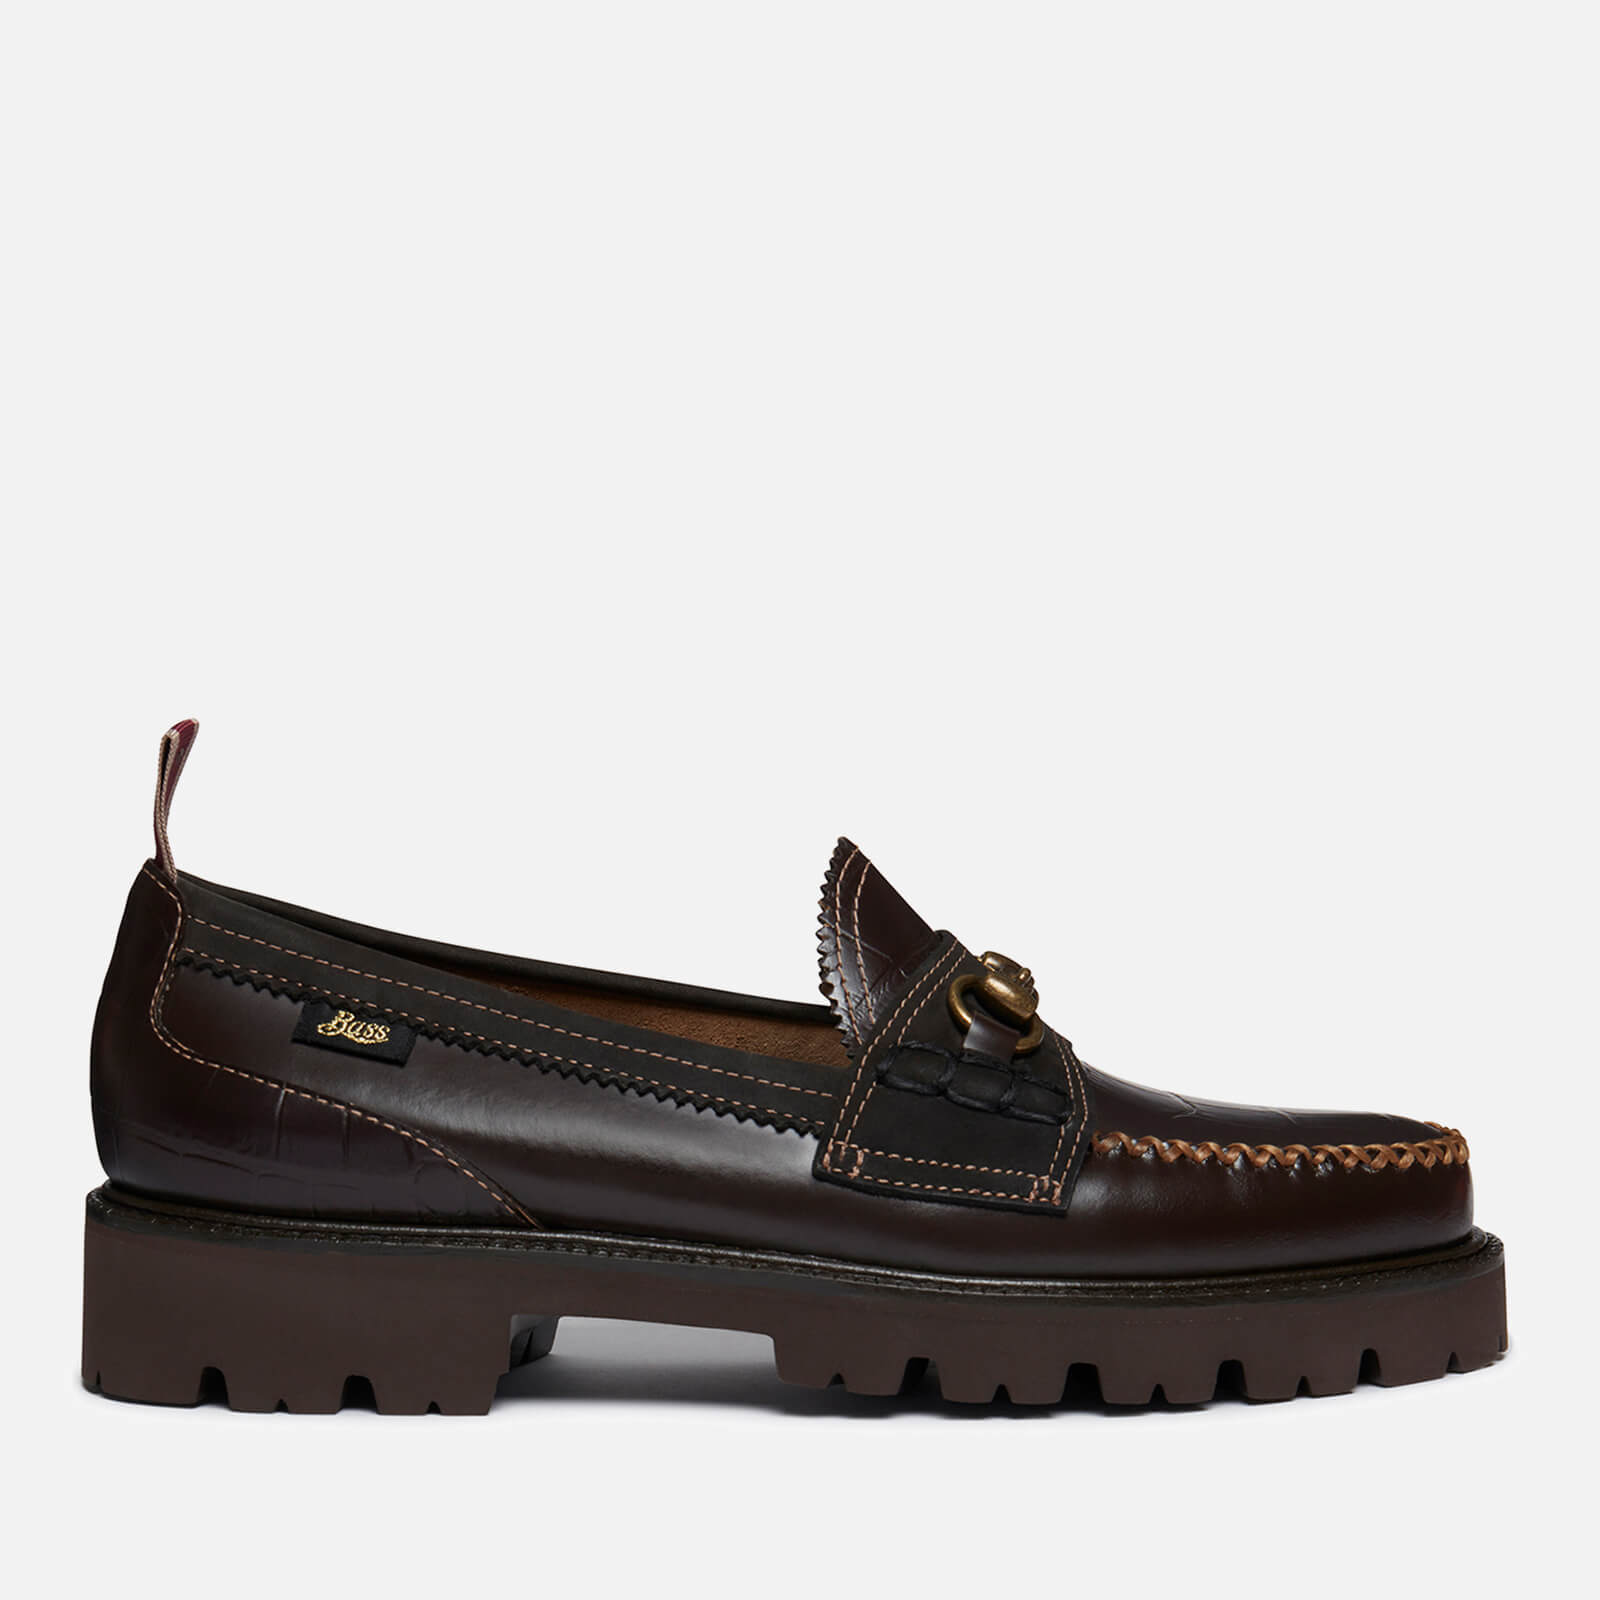 G.H Bass & Co x Nicholas Daley Men’s Super Lug Lincoln Leather Loafers